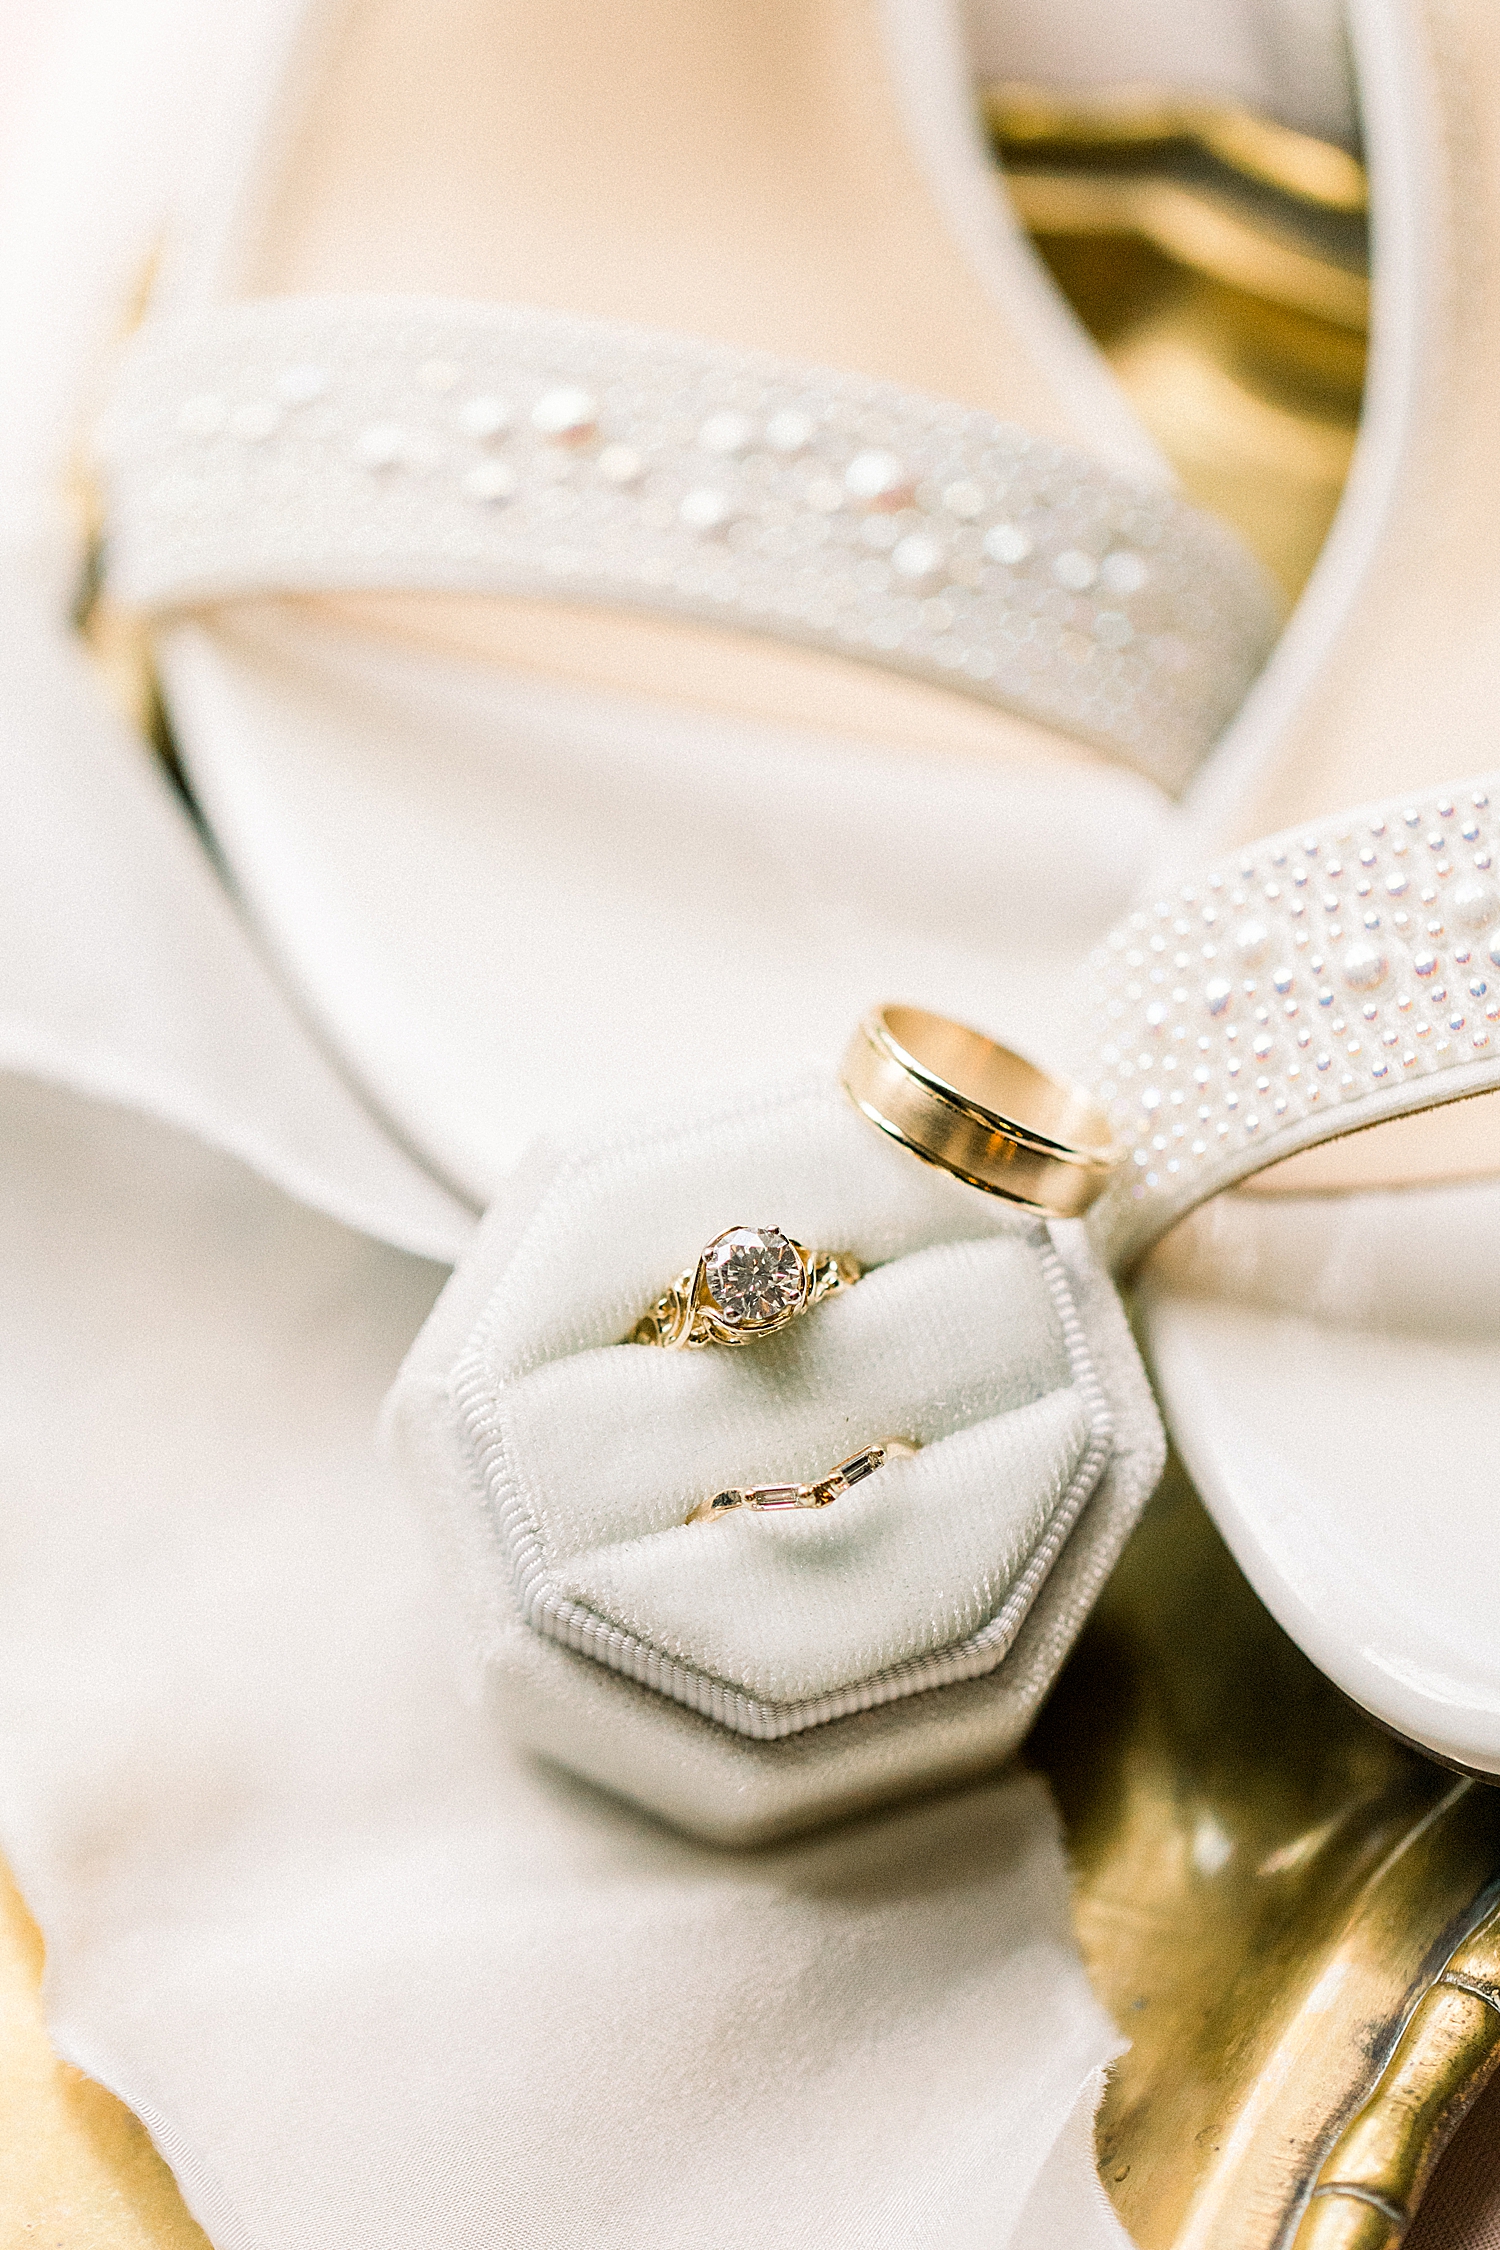 bride's jewelry rests on shoes and ivory ring box